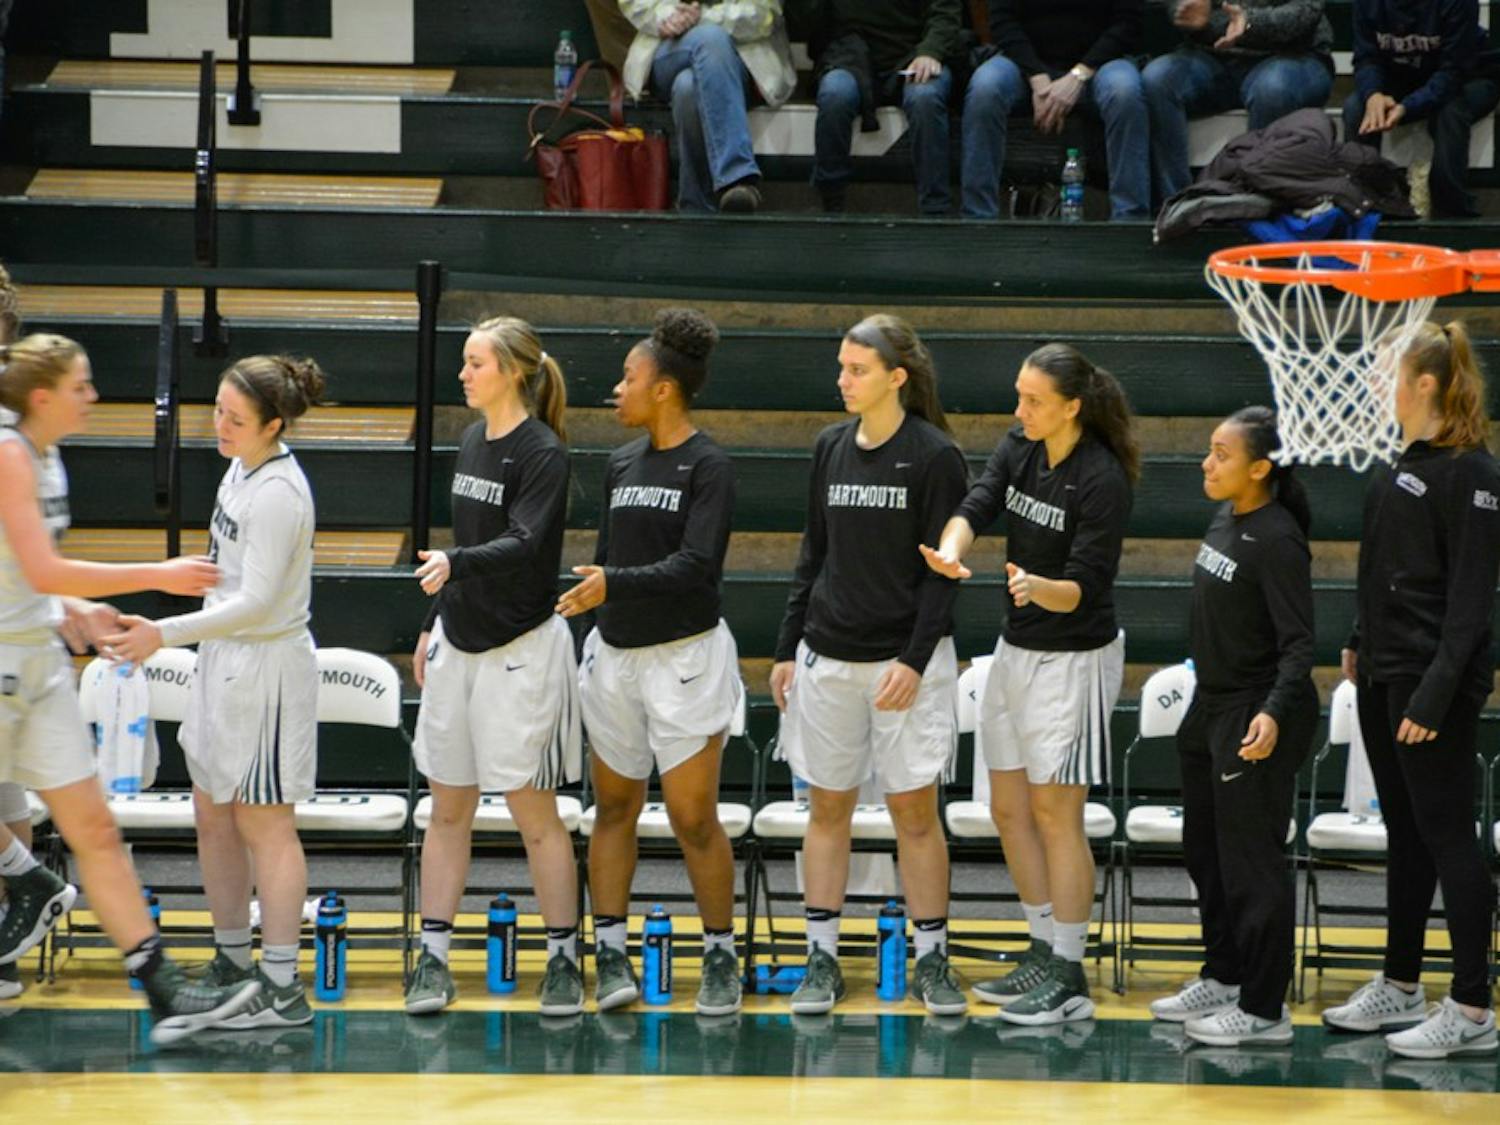 The Class of 2022 also added five new players to the Dartmouth women’s basketball team, which finished 15-12 overall and 7-7 in conference play this past season.